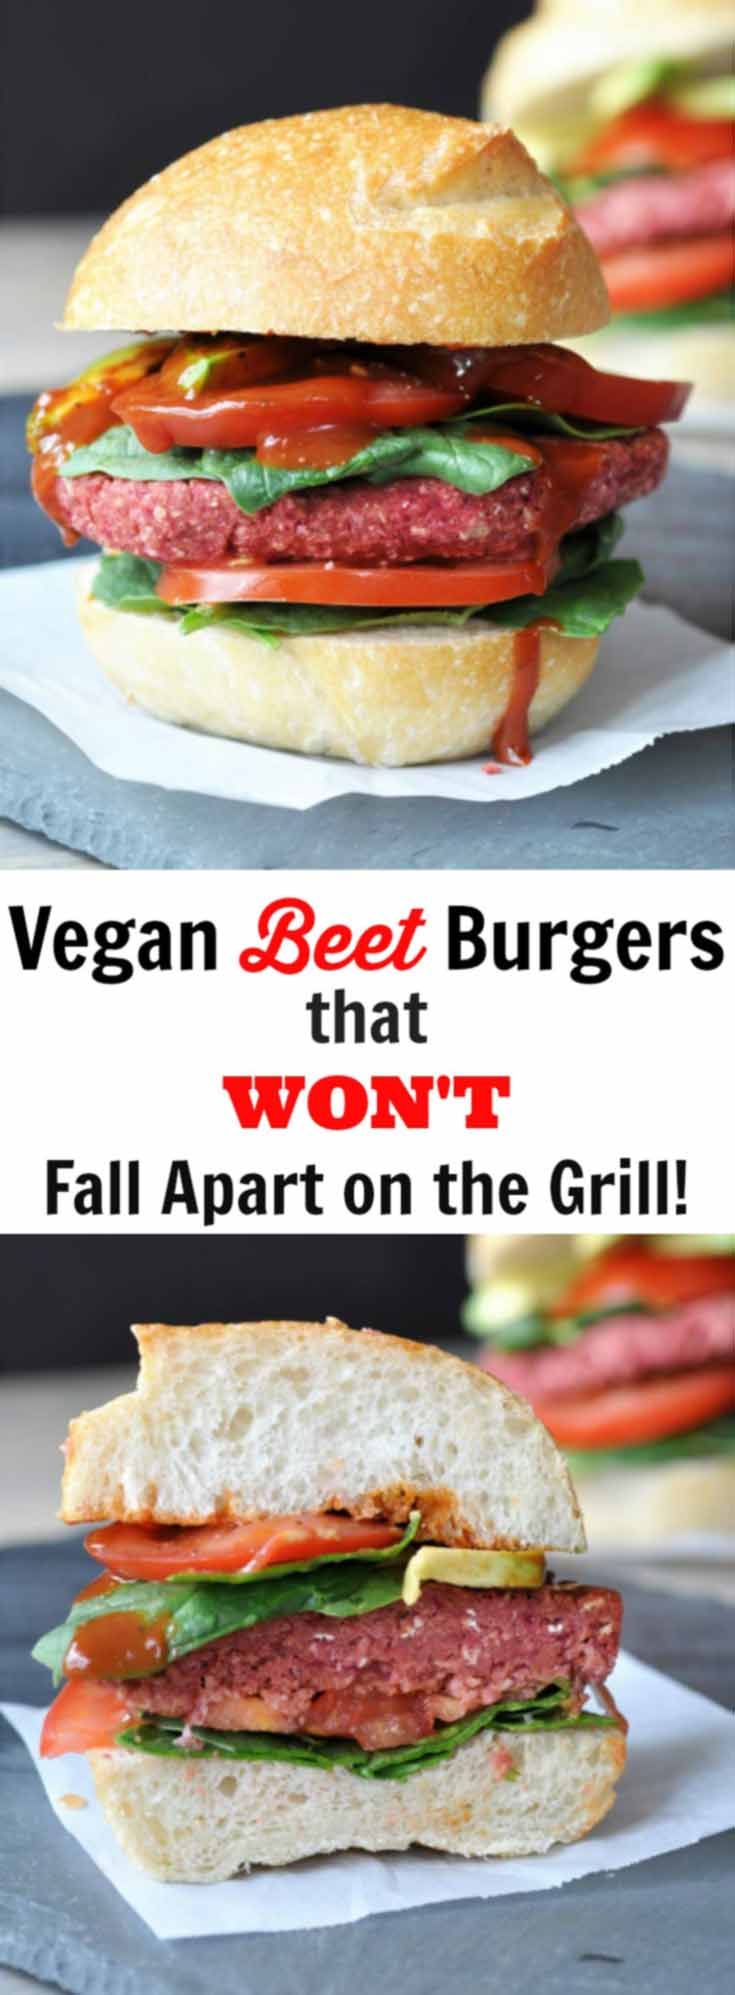 Vegan Beet Burgers that Won't Fall Apart on the Grill! This veggie burger recipe is made with aquafaba. It;s the perfect binder, and it holds the burger together like nothing else does. www.veganosity.com